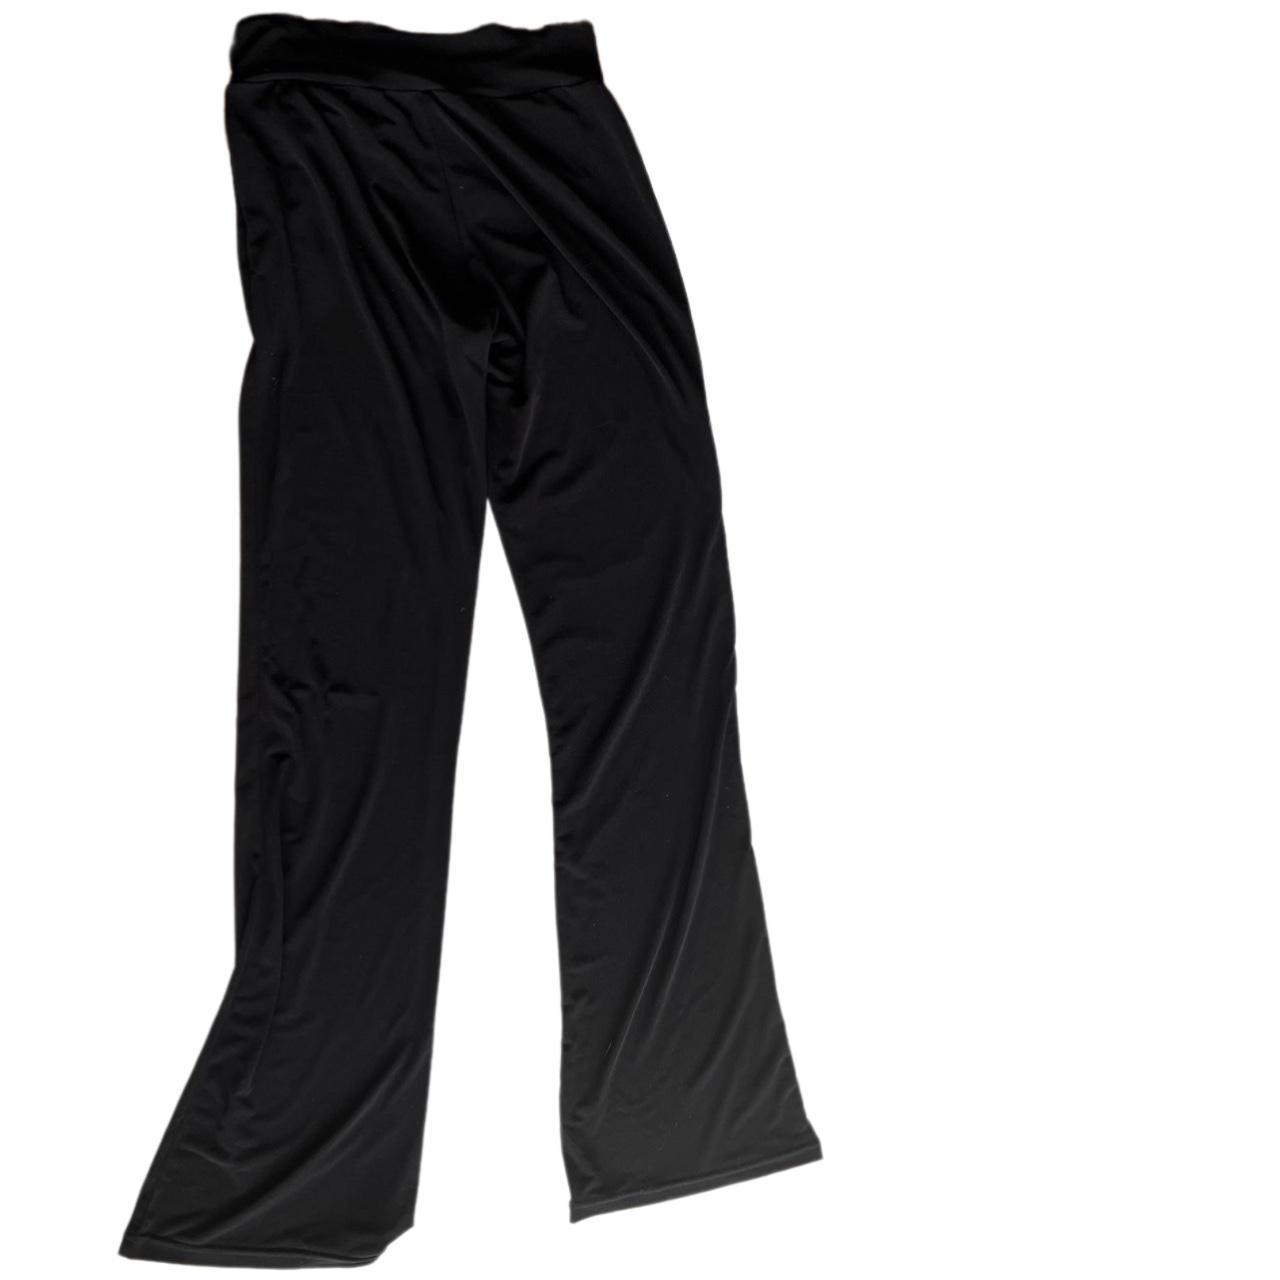 Product Image 2 - I.AM.GIA black flowy pants
Size: small
Price: